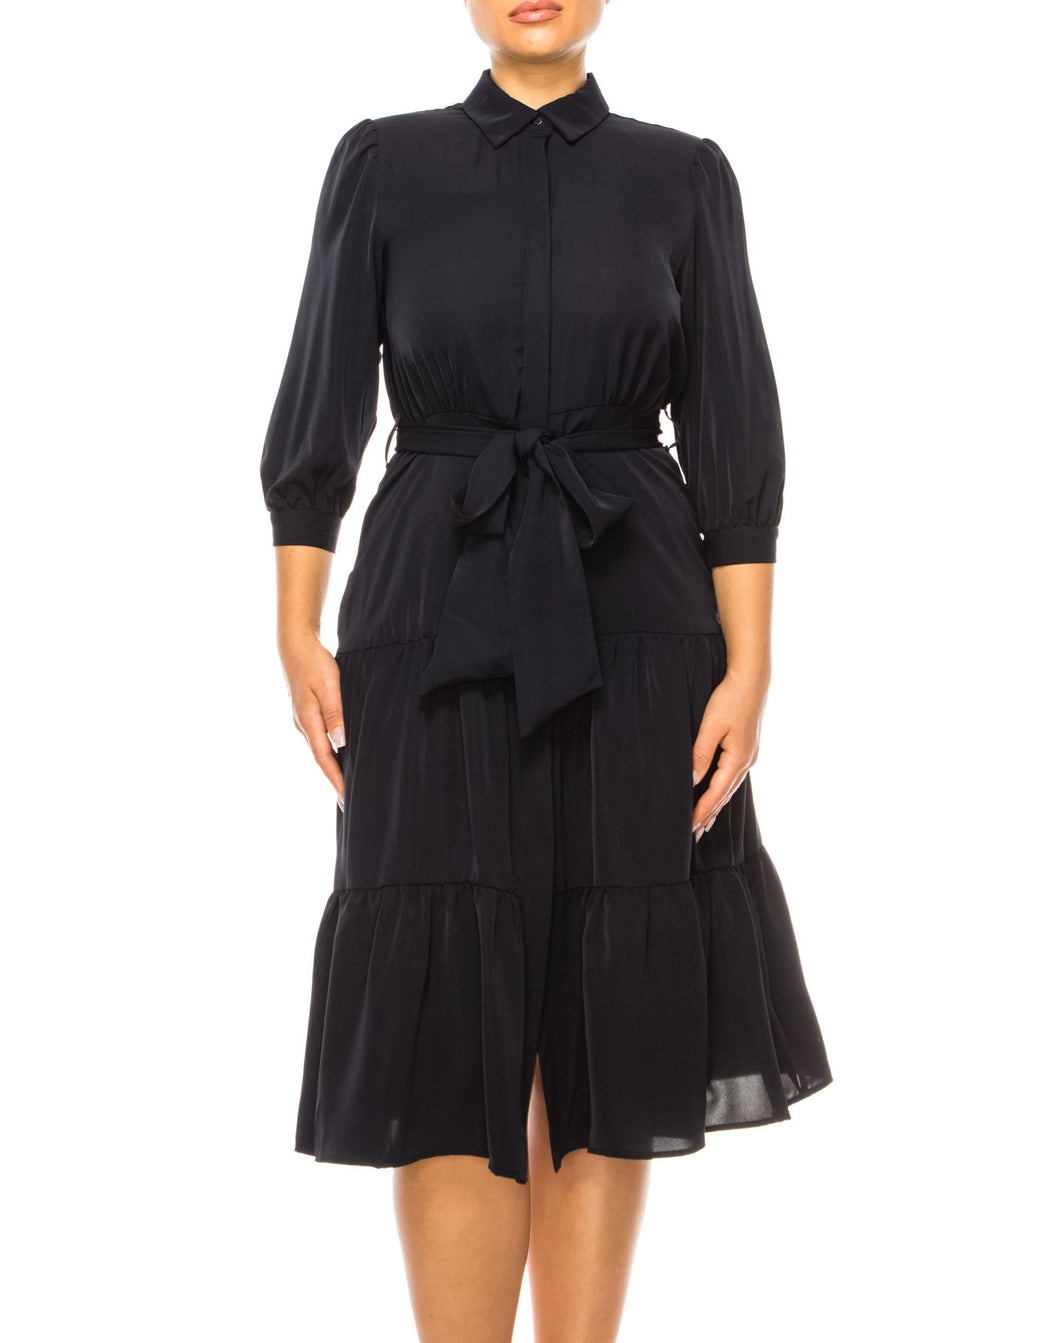 Nicole Miller Tiered Navy Midi Day Dress, Sizes 4/6/14 Remaining! Women's Apparel Dresses, Modest Office Home